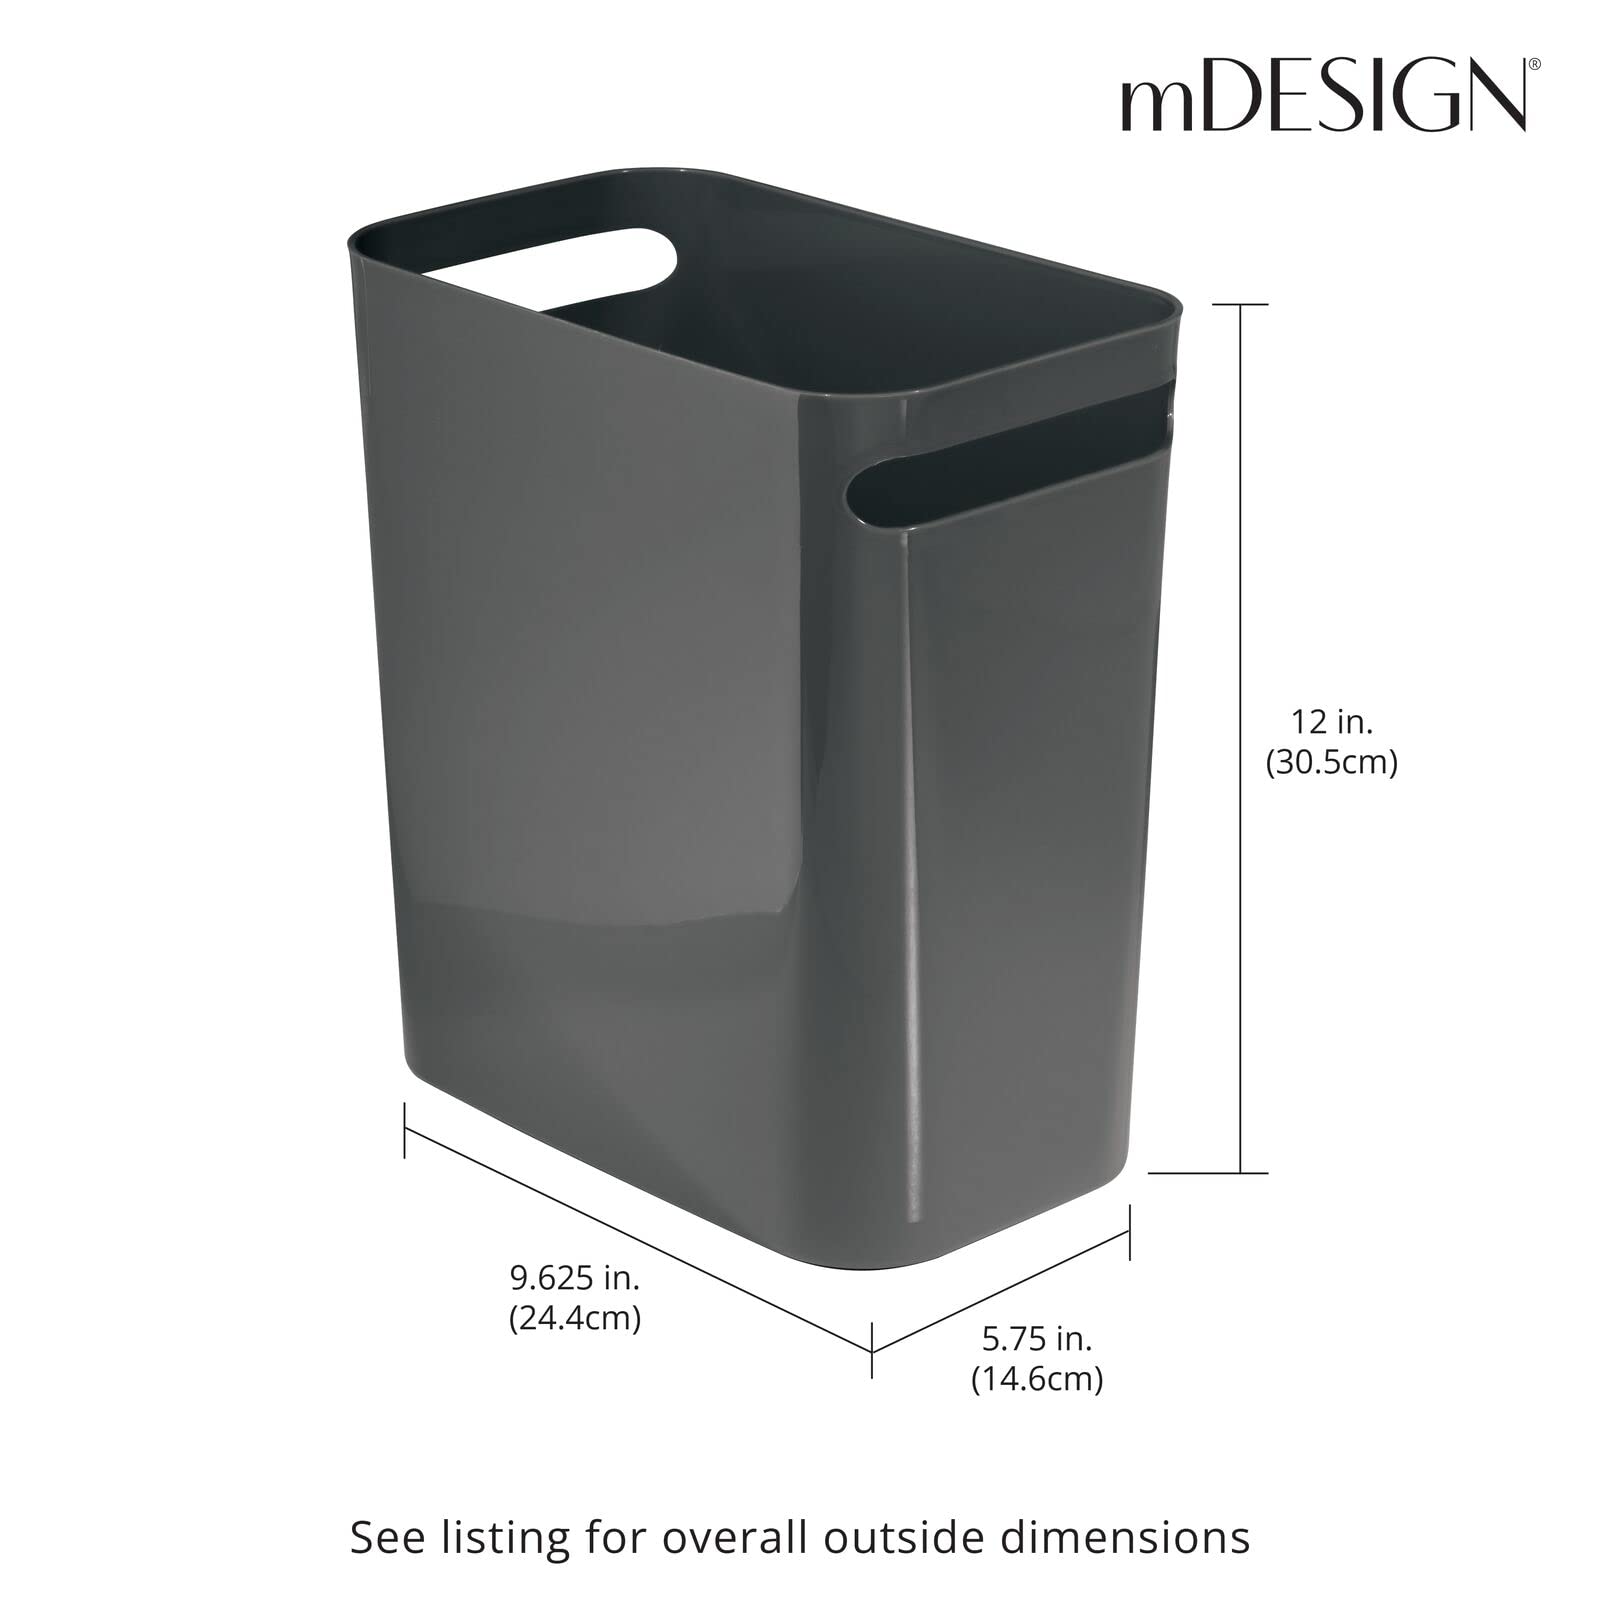 mDesign Plastic Slim Large 2.5 Gallon Trash Can Wastebasket, Classic Bathroom, Bedroom, Kitchen, Office Garbage Container Recycle Bin, Outdoor Waste, Recycling - Aura Collection, 2 Pack, Charcoal Gray